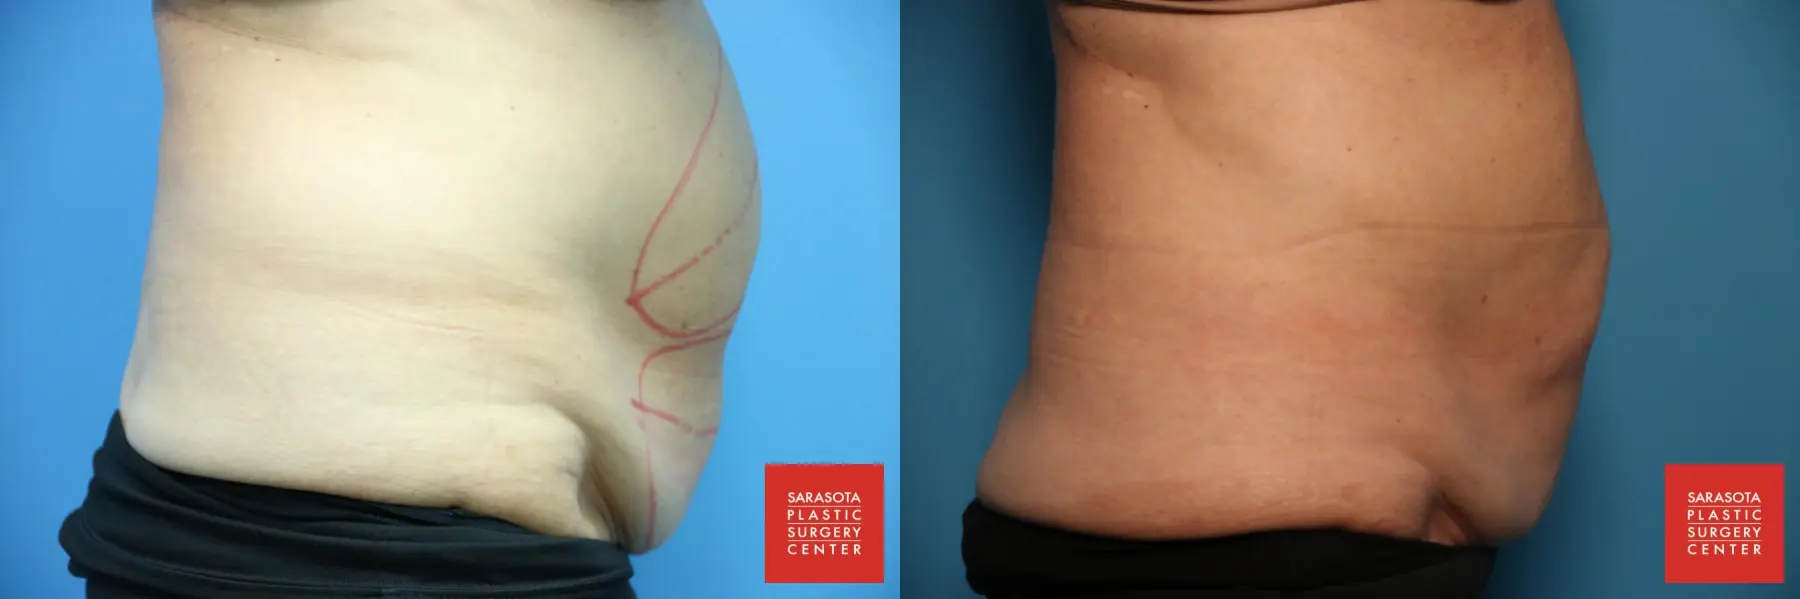 CoolSculpting®: Patient 6 - Before and After 7